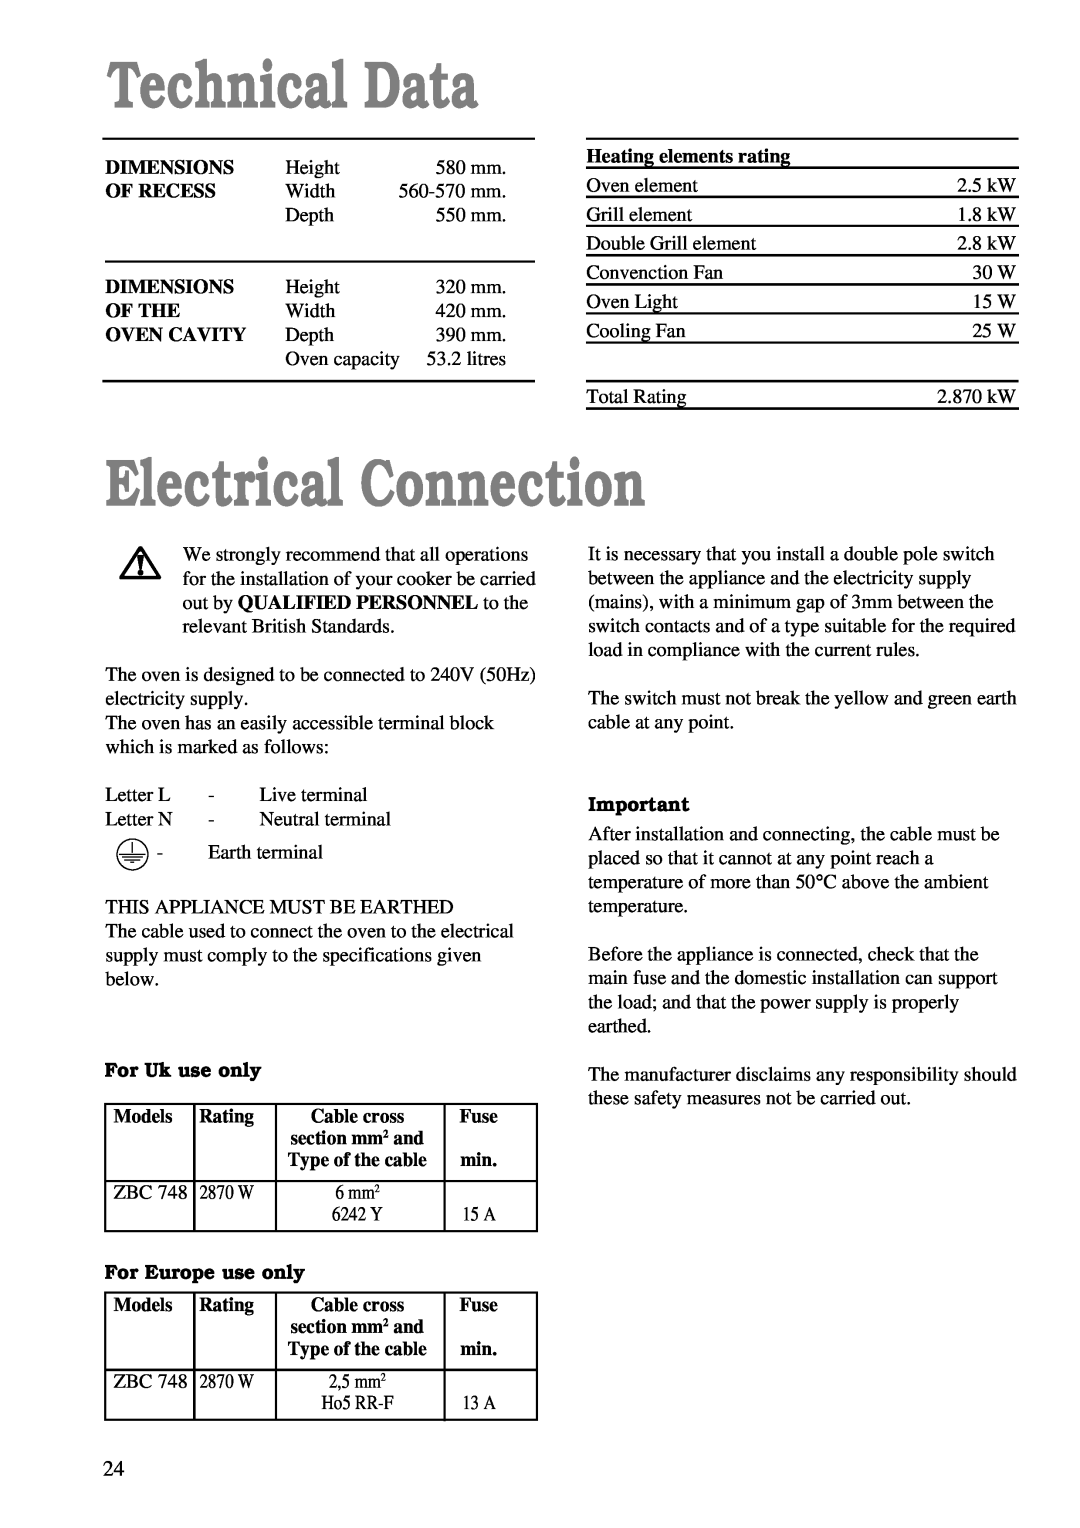 Zanussi ZBC 748 Technical Data, Electrical Connection, Dimensions, Of Recess, Of The, Oven Cavity, Heating elements rating 